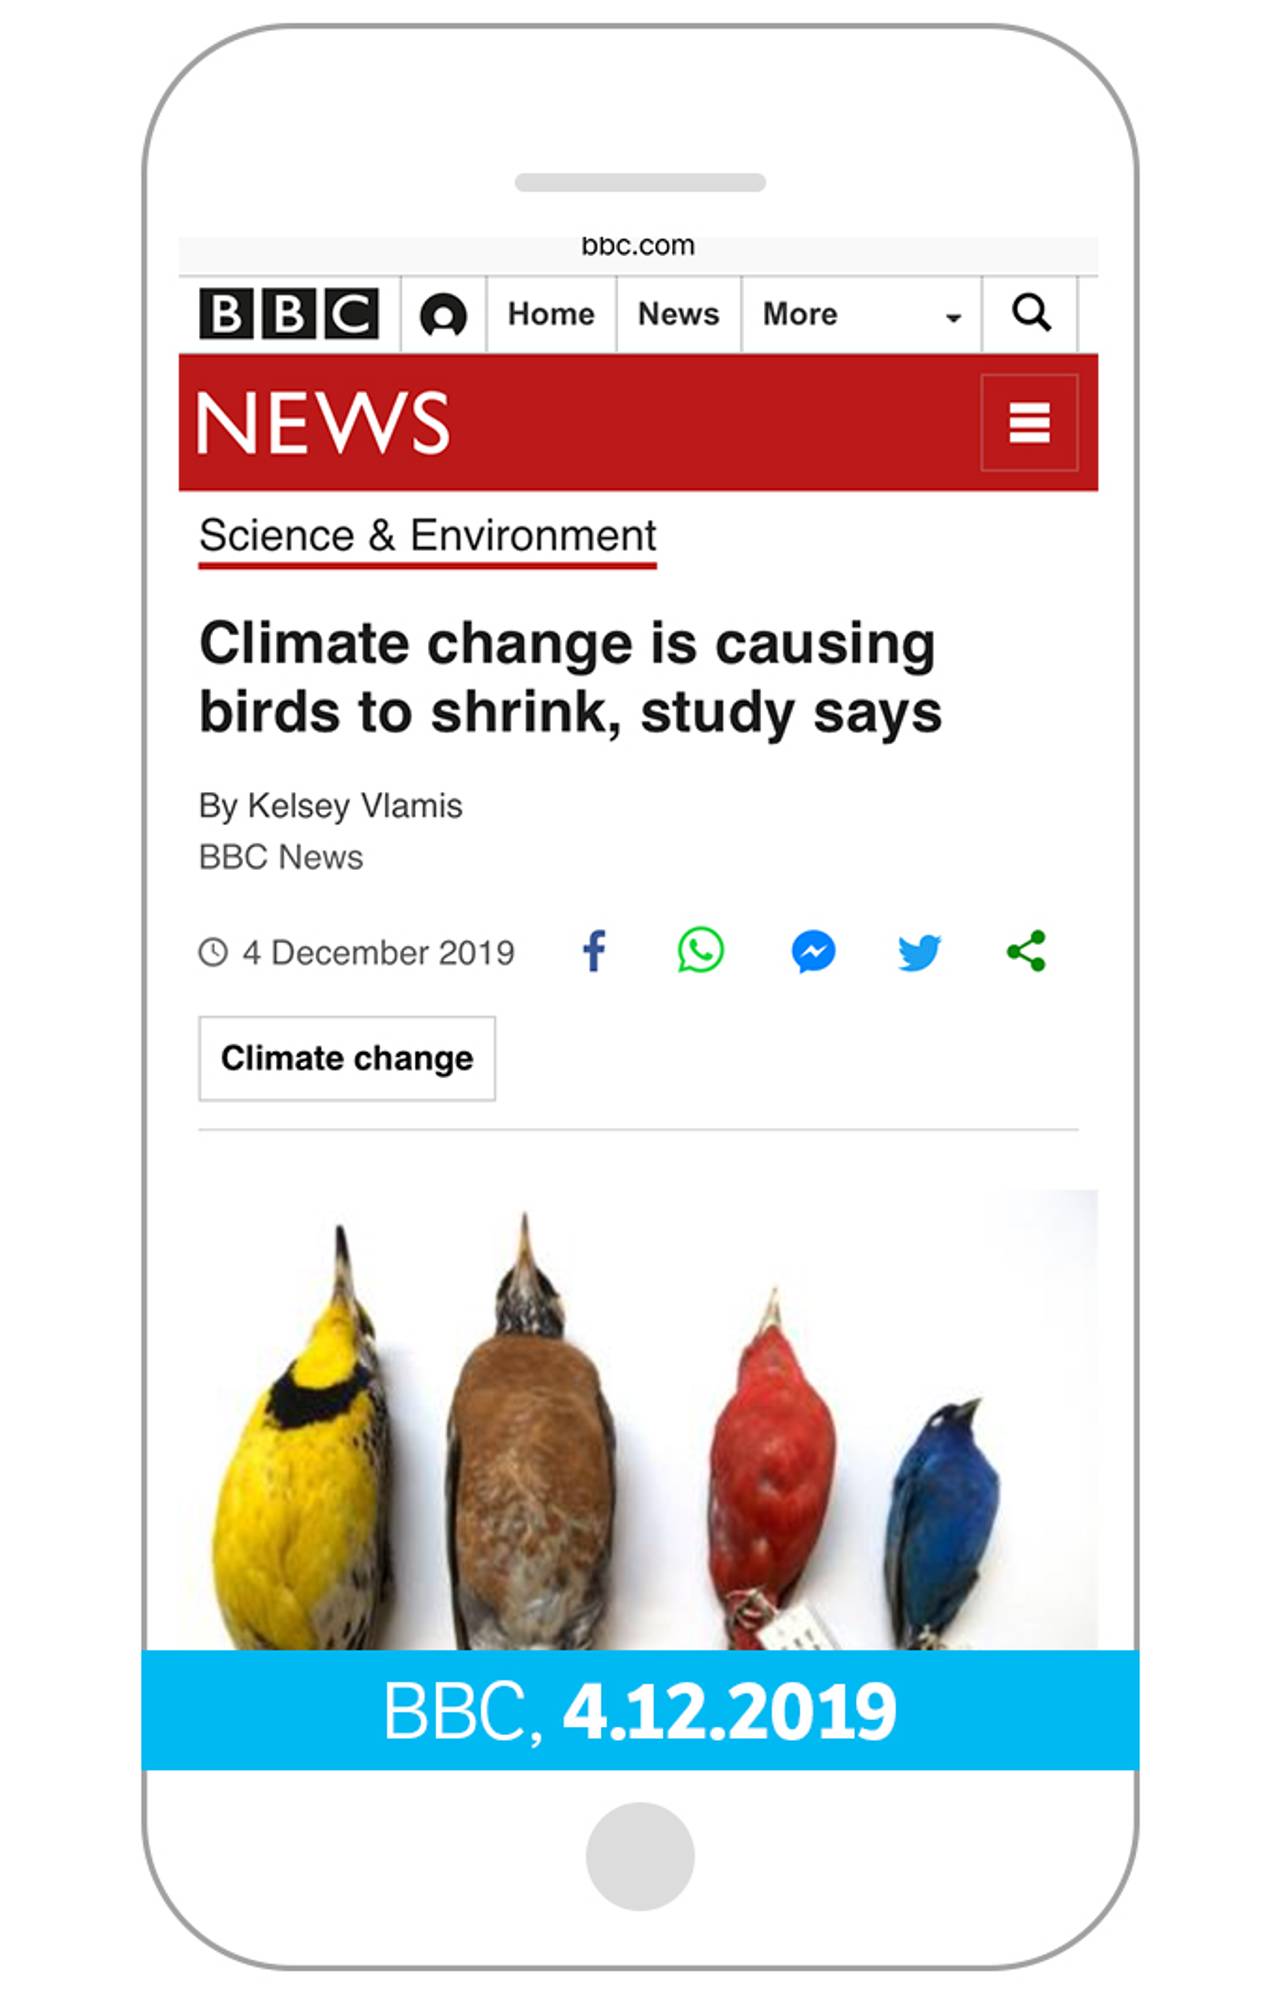 Cliamte change is causing birds to shrink